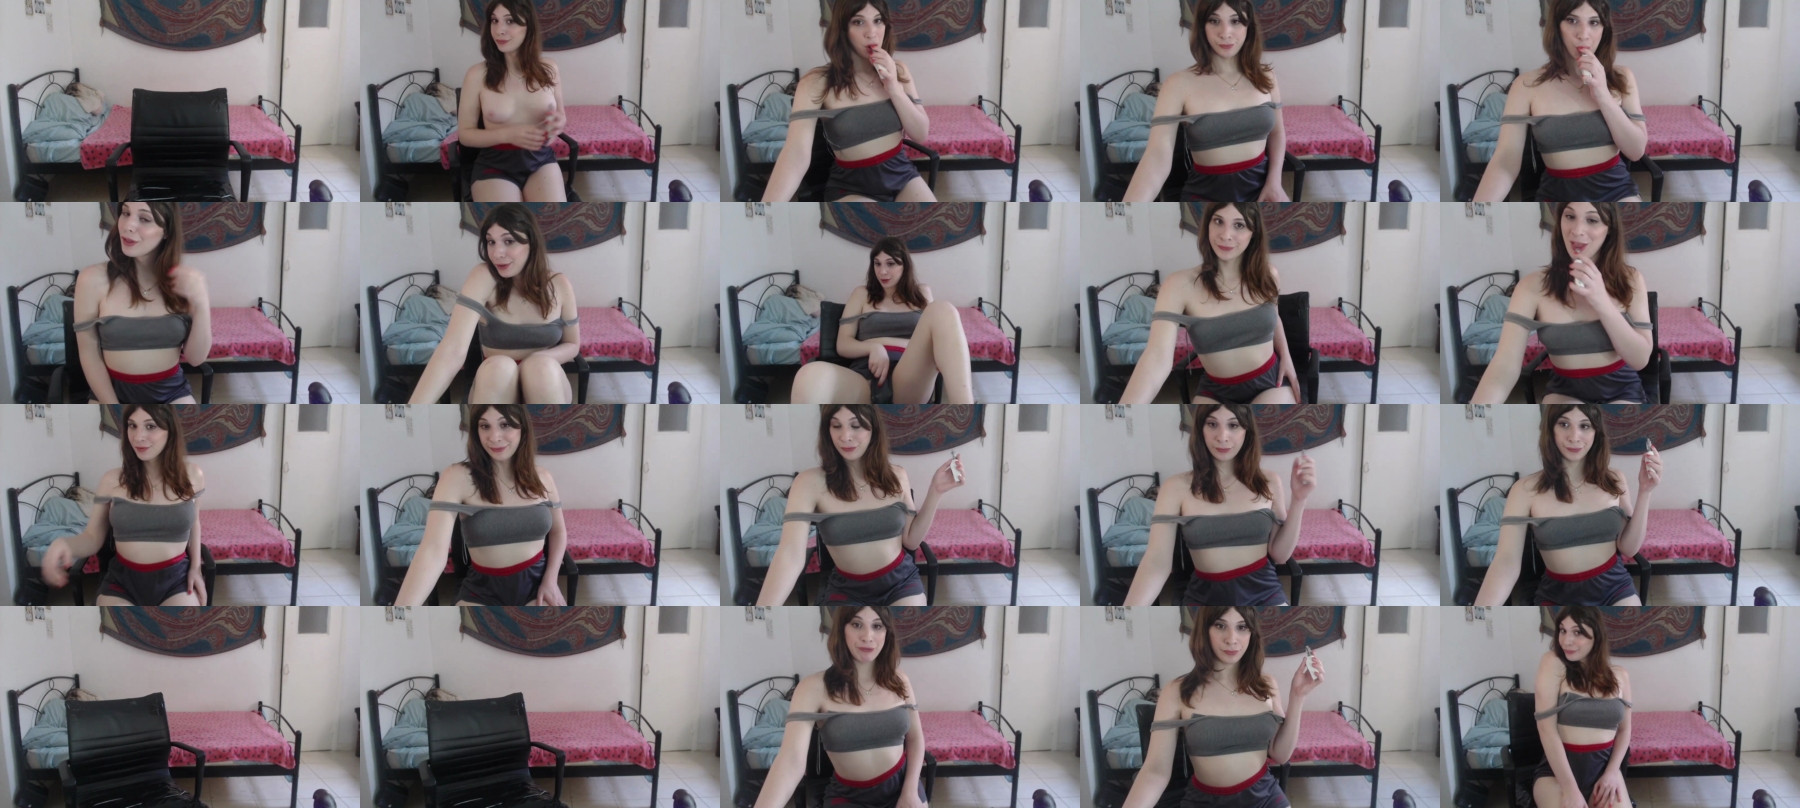 I_Miss_Behave Topless CAM SHOW @ Chaturbate 14-04-2021